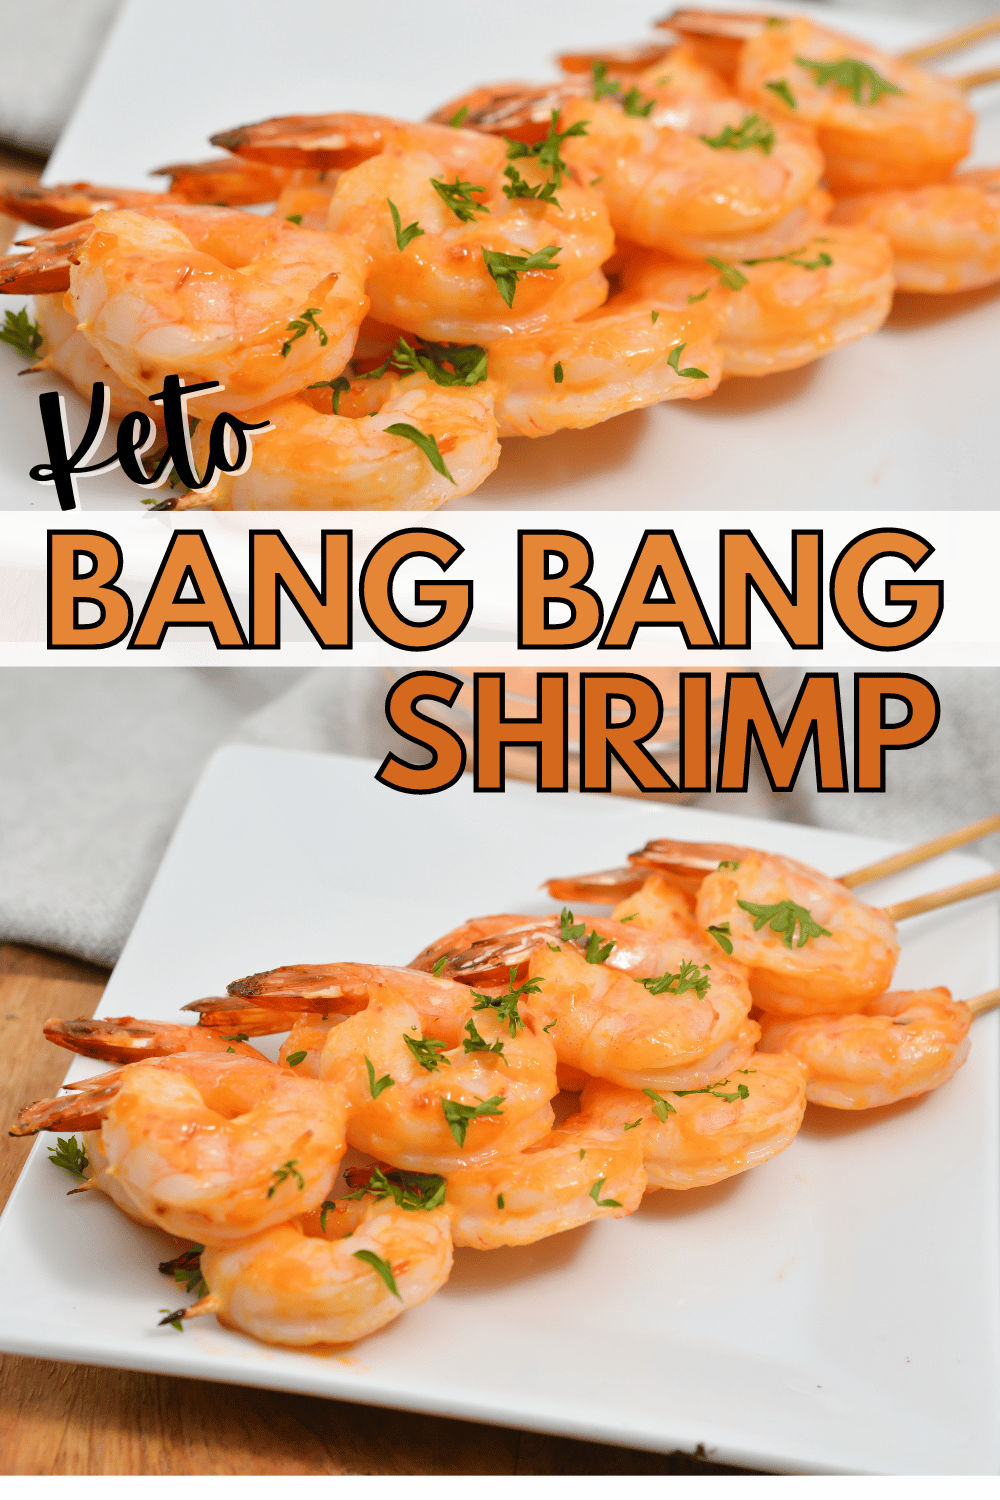 This Keto Bang Bang Shrimp recipe is a delicious, low-carb version of the popular restaurant dish. It’s an easy to make appetizer or meal. #ketobangbangshrimp #bangbangshrimp #copycatrecipe #appetizer via @wondermomwannab